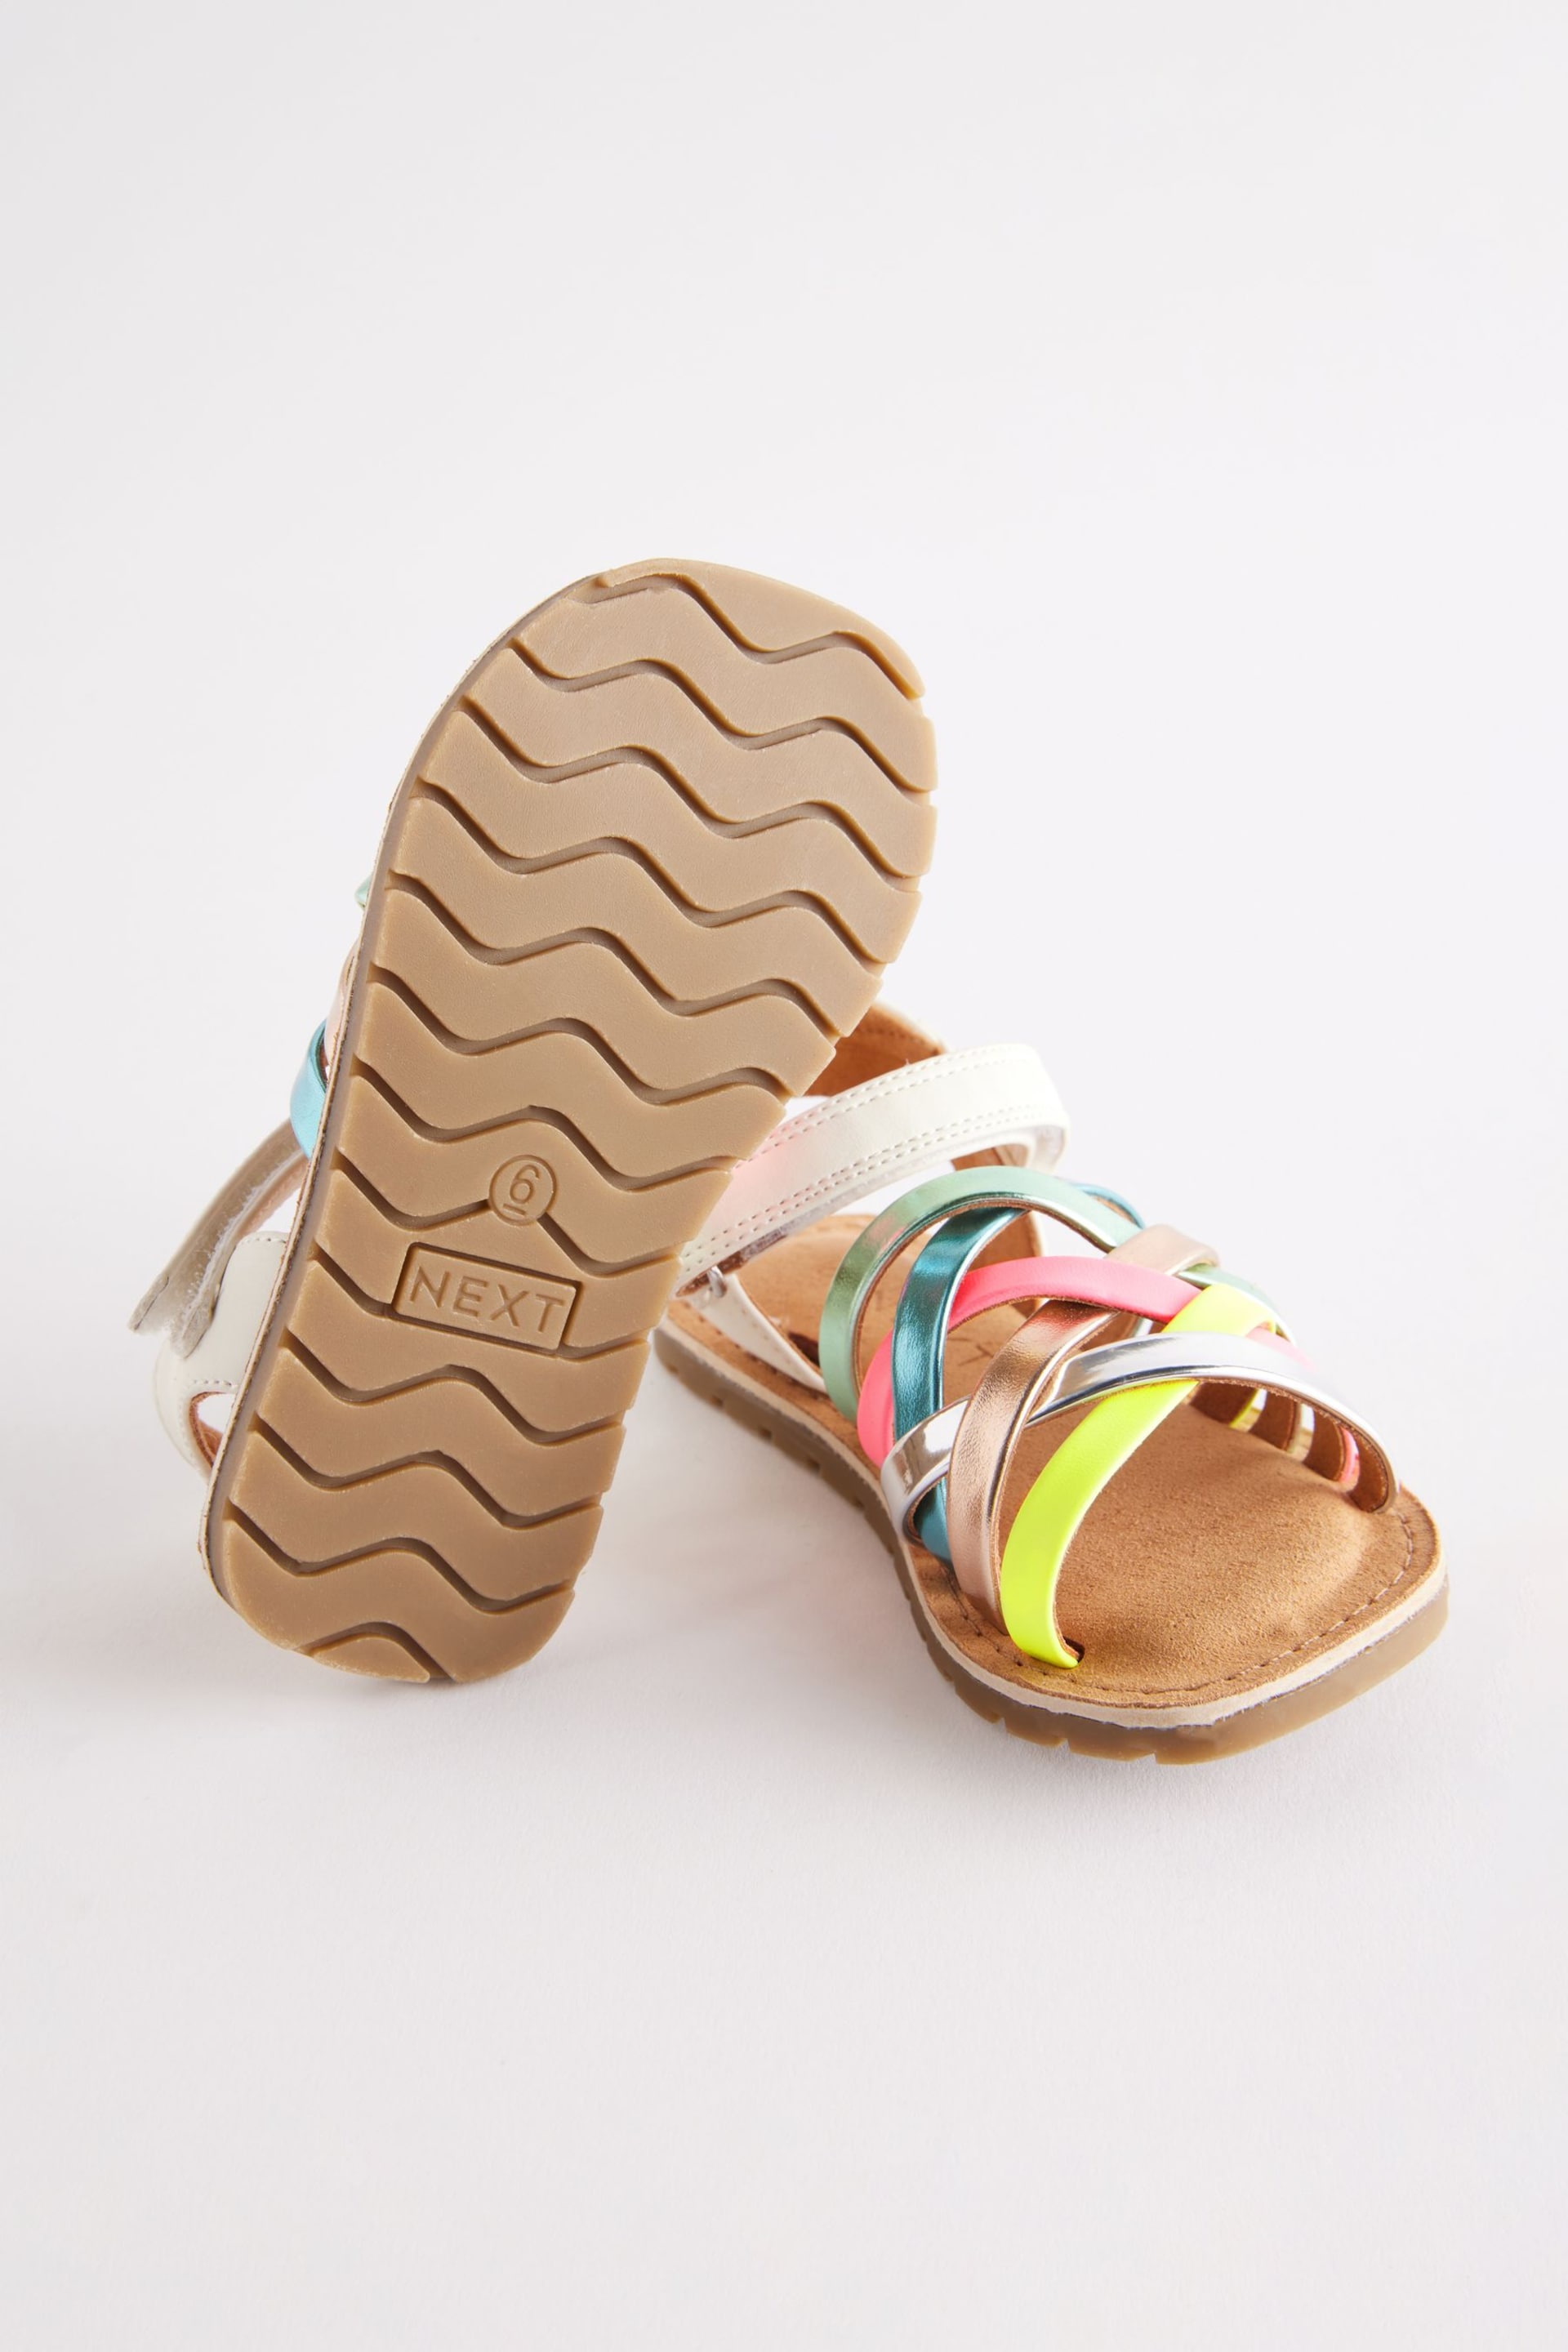 Multi Woven Sandals - Image 5 of 6